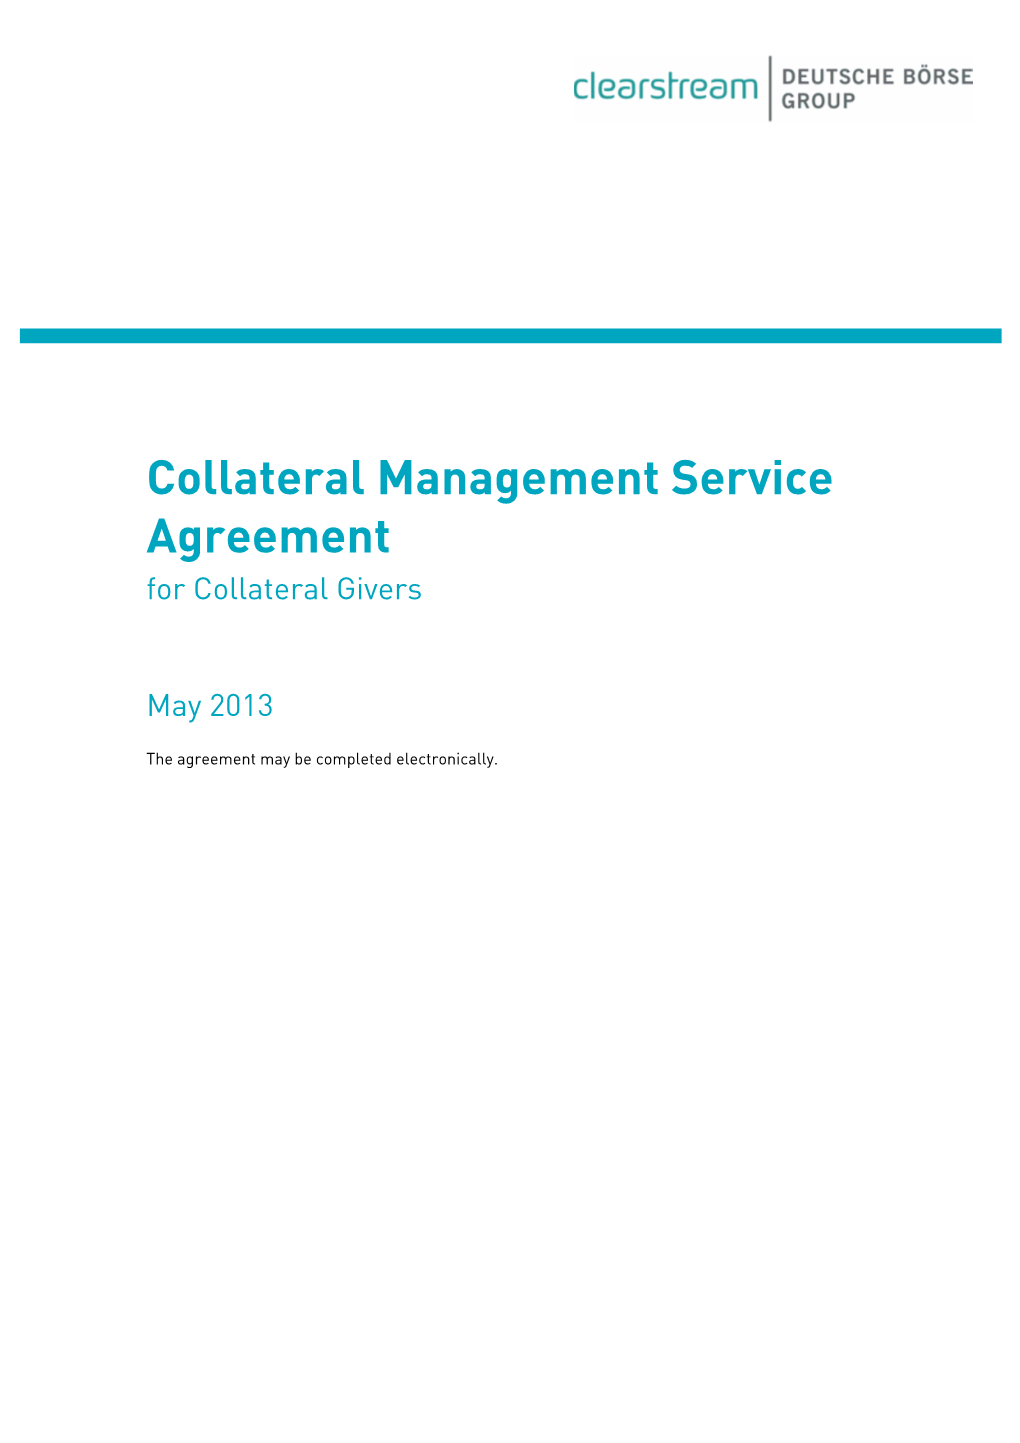 Collateral Management Service Agreement for Collateral Givers